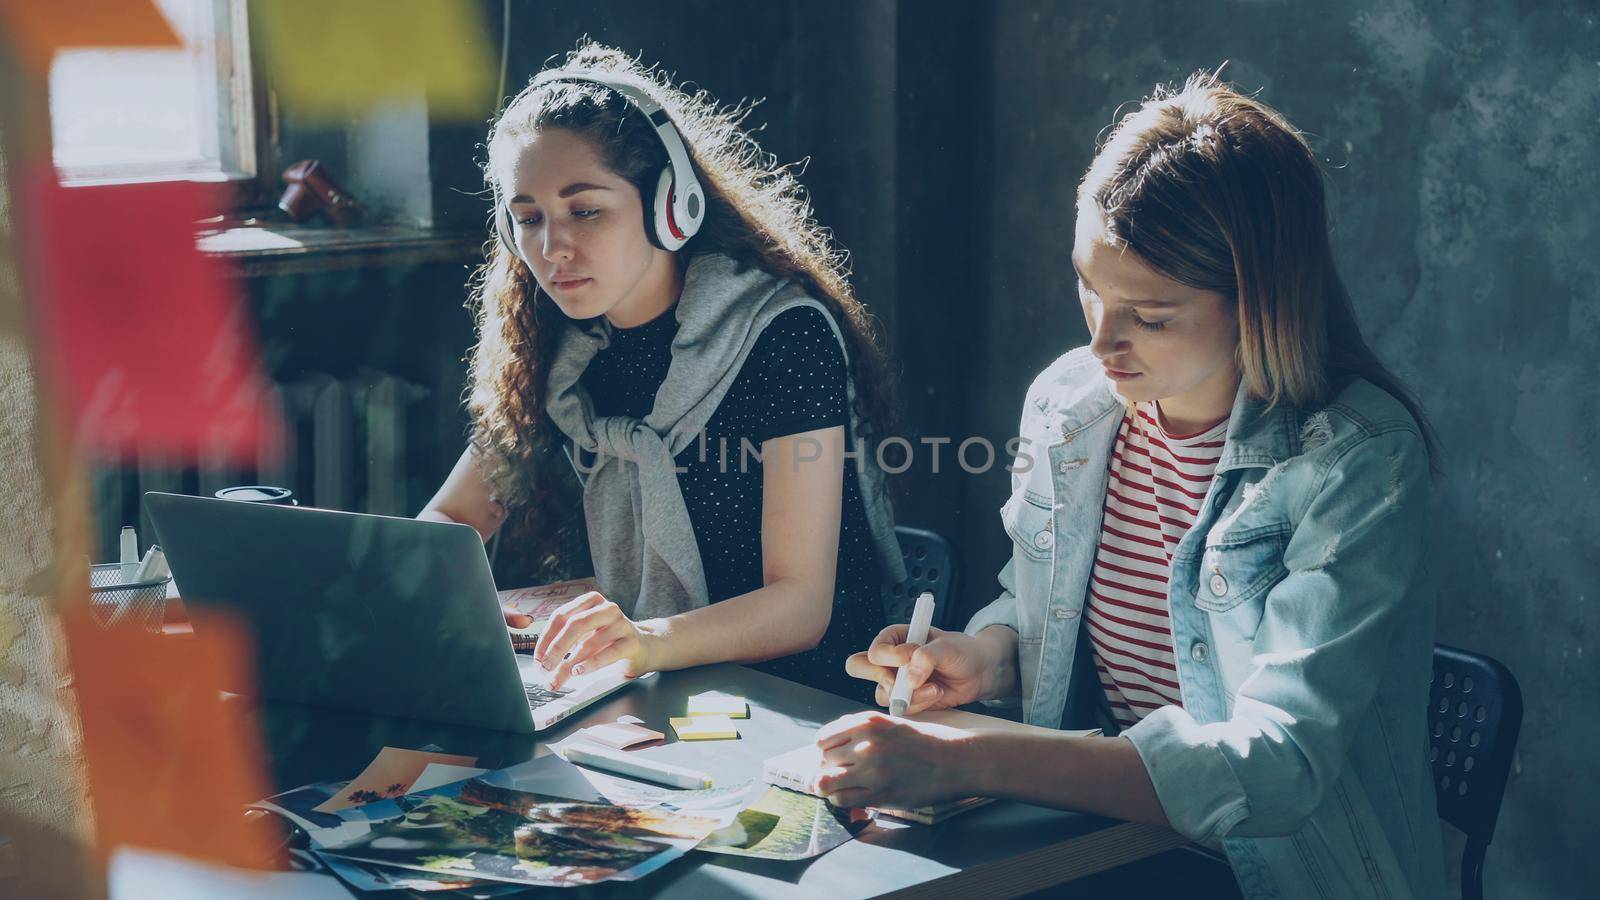 Team of creative designers is working together in light office. Cheerful dark-haired lady is listening to music and working with laptop, and blond woman is drawing images in notepad